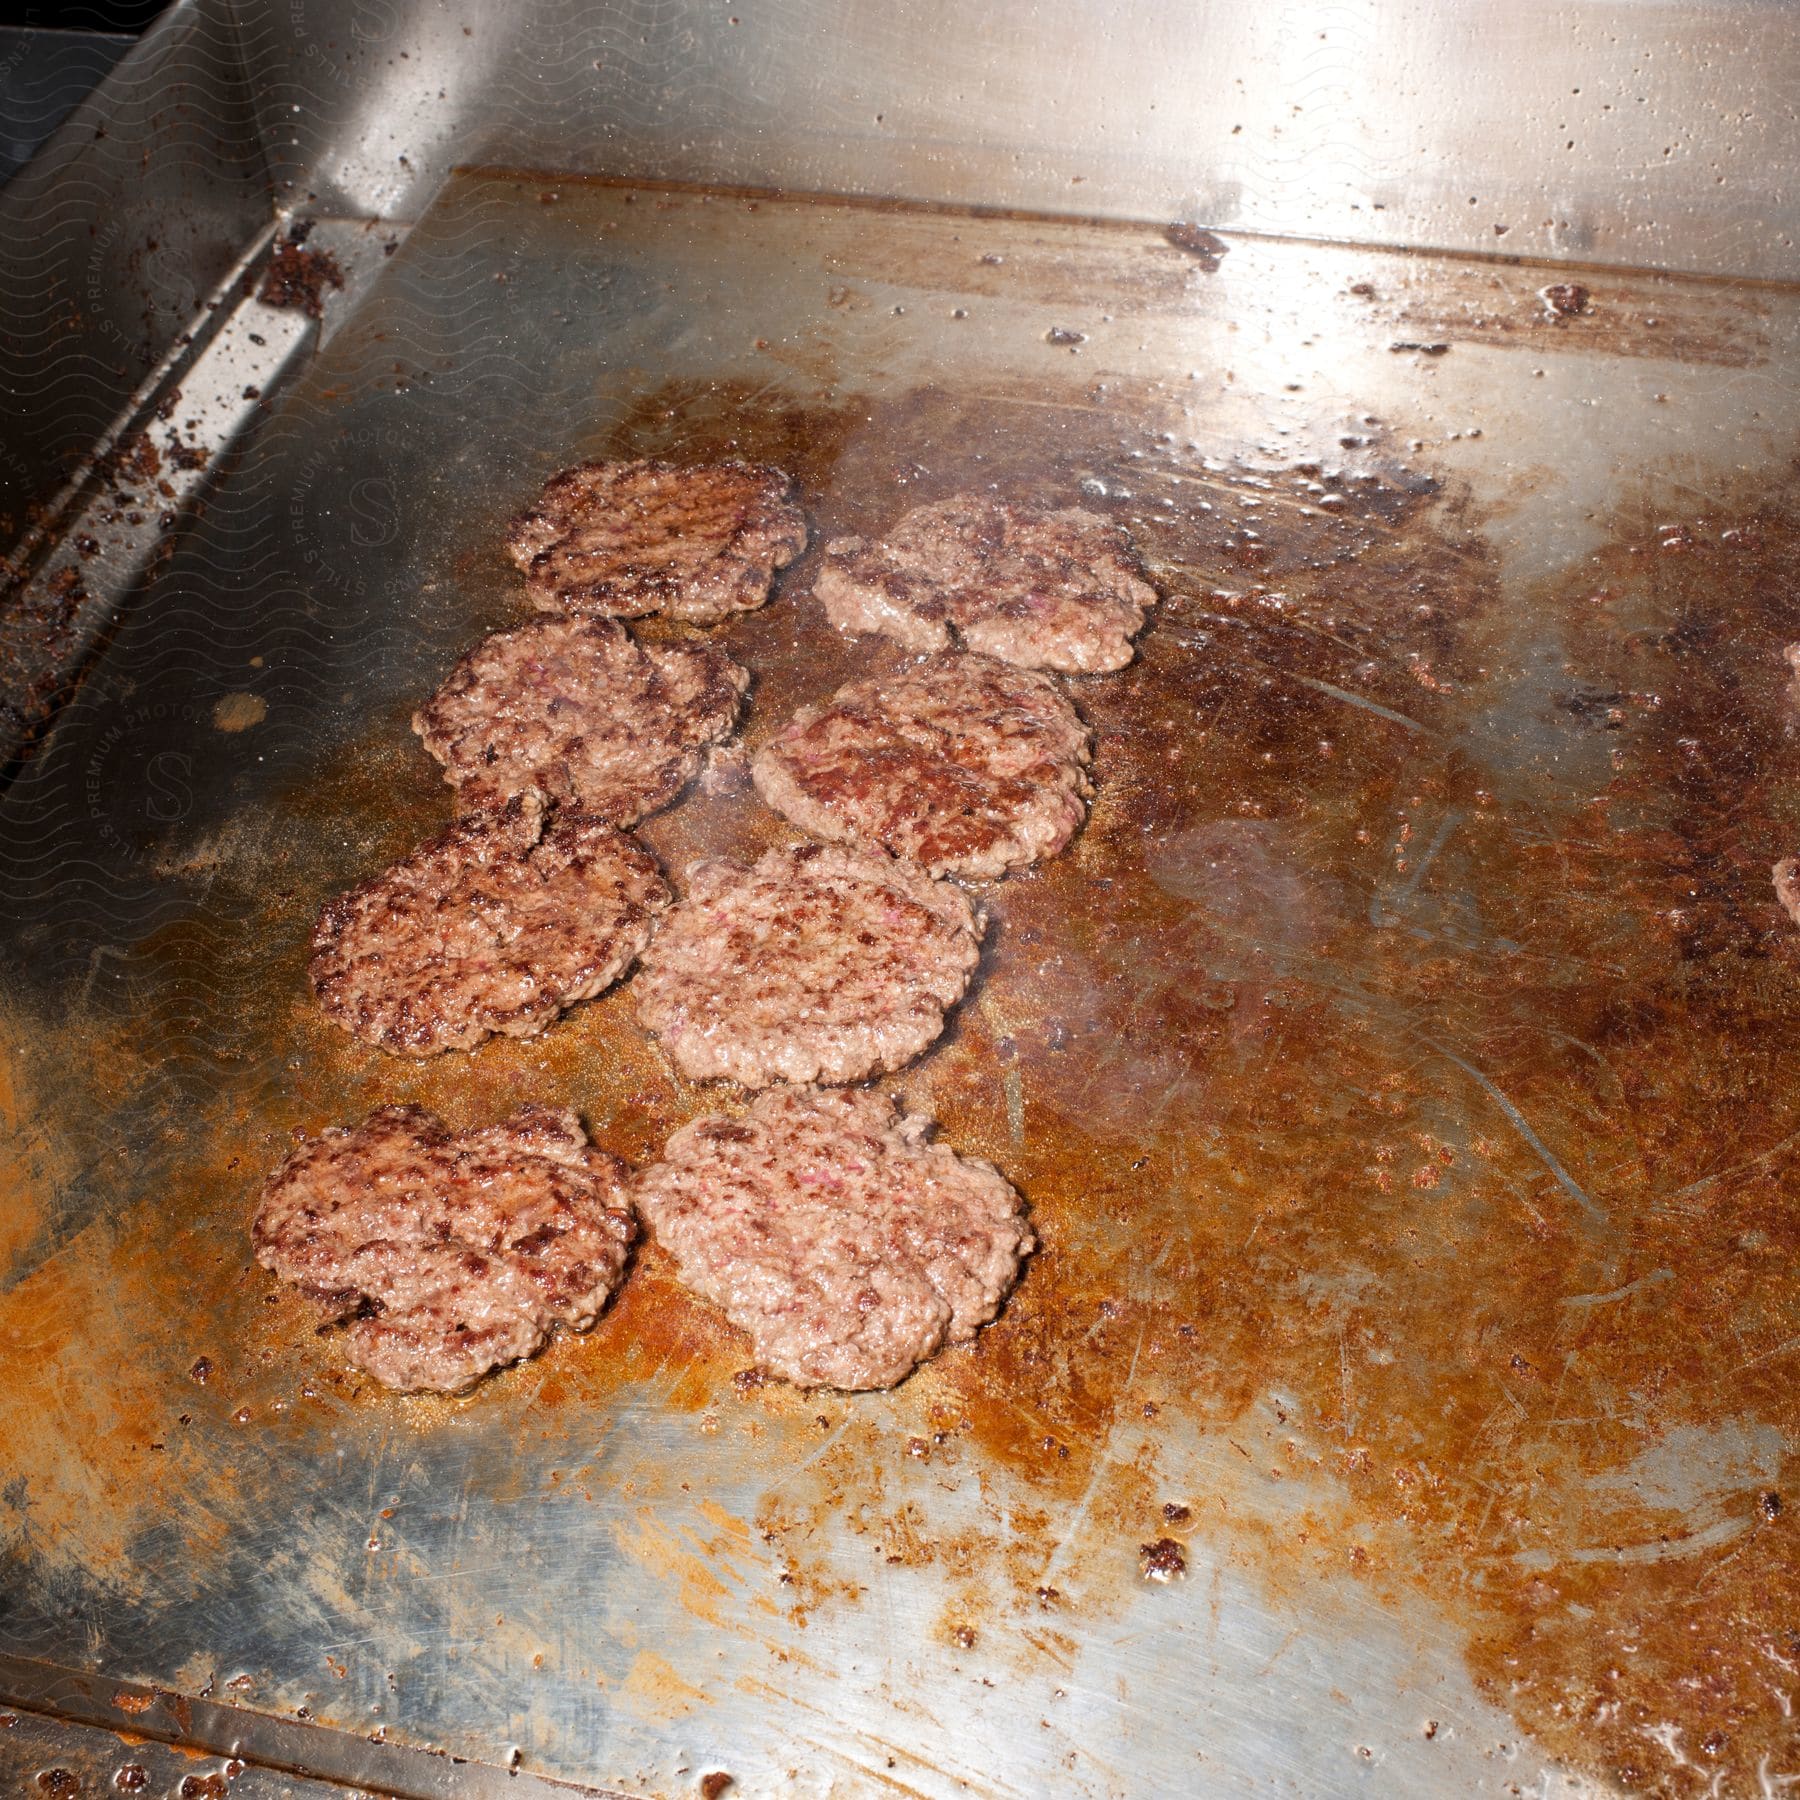 A hamburger is being cooked on an iron griddle